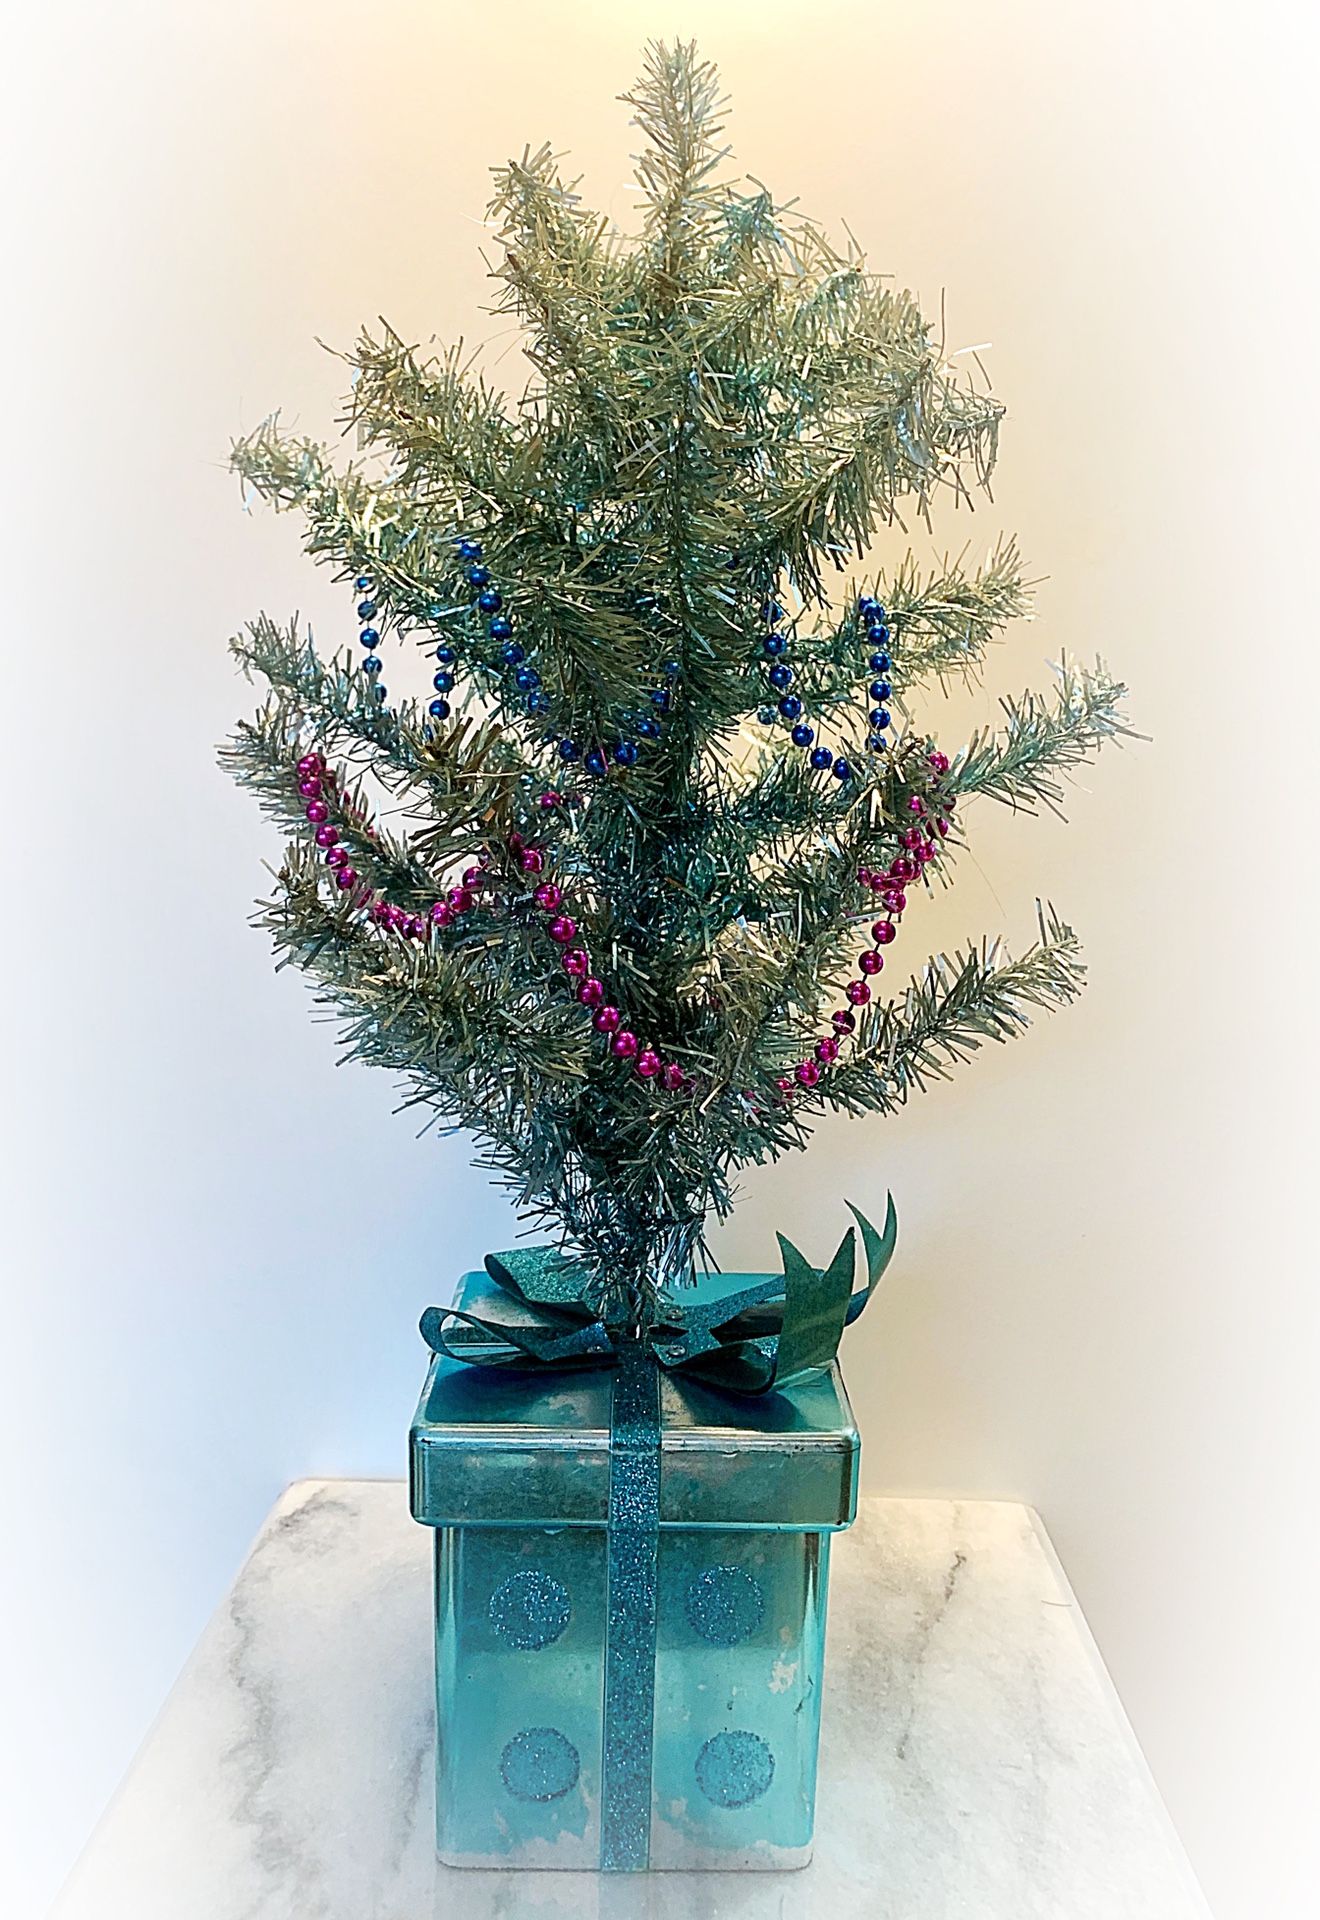 Tinsel Christmas Tree Turquoise Aqua Silver Blue. Holiday Table Top Topiary Tree in Box Present Faded Metallic Stand.